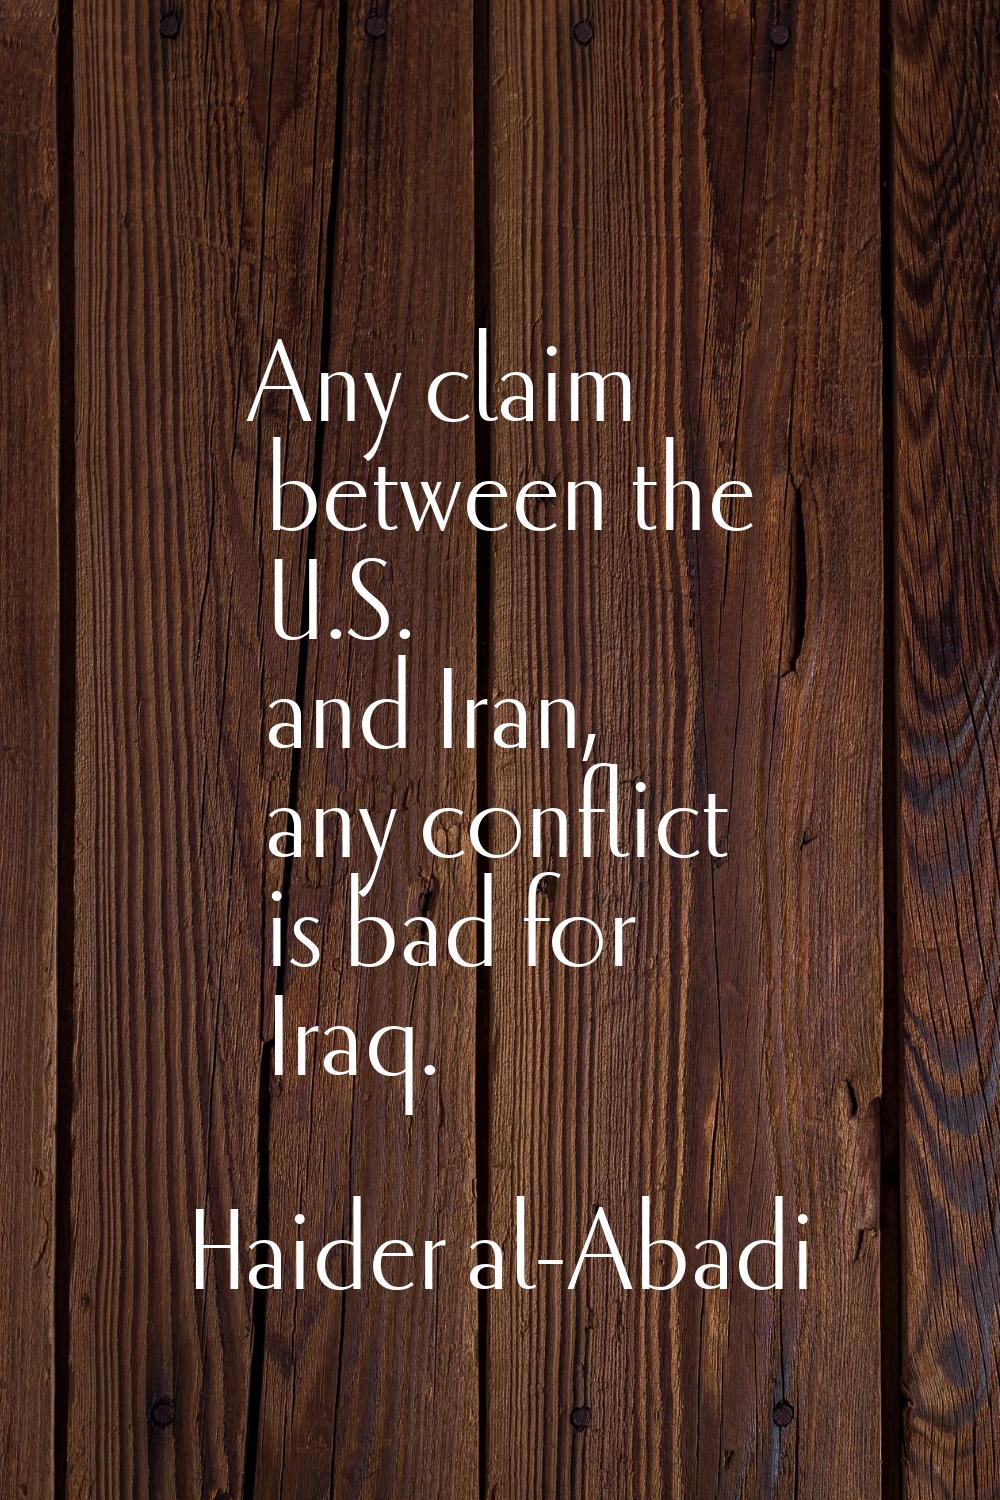 Any claim between the U.S. and Iran, any conflict is bad for Iraq.